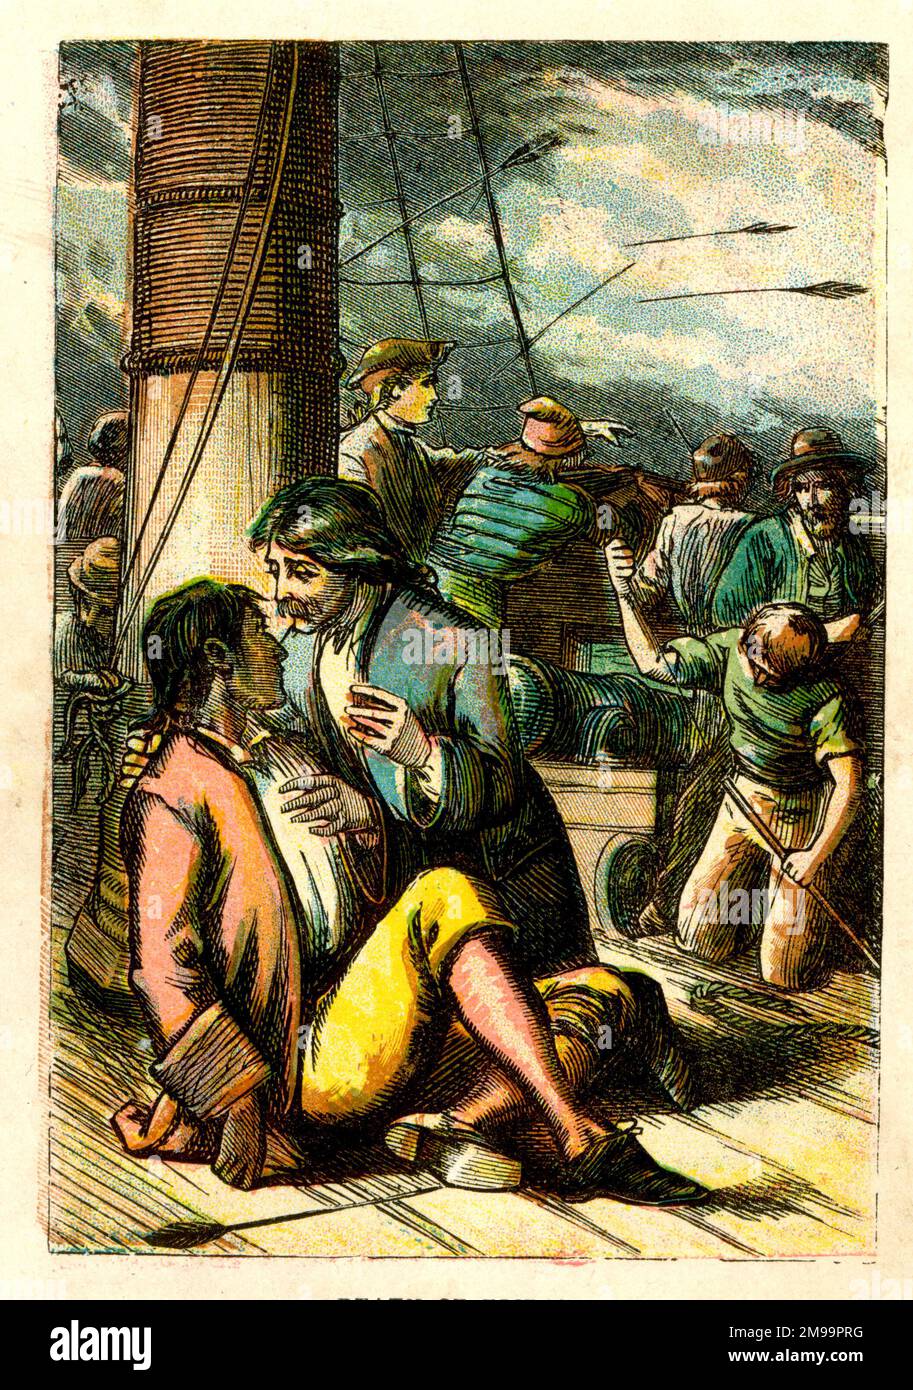 The Death of Man Friday, an episode in the story of Robinson Crusoe. Stock Photo